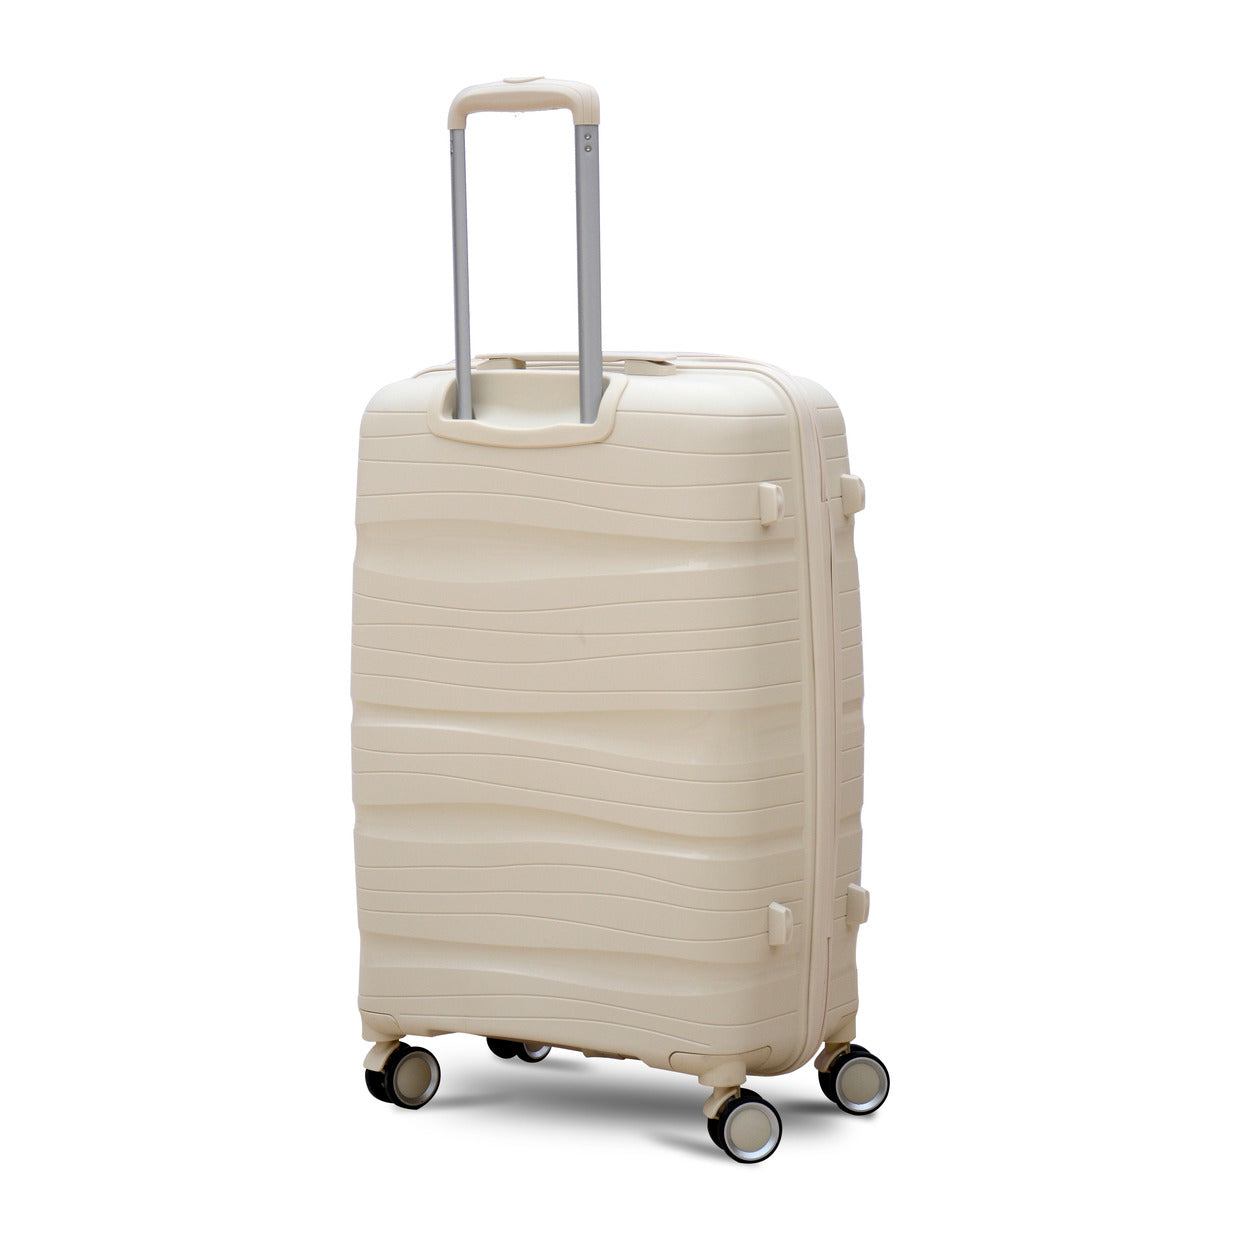 20" Beige Colour Royal PP Luggage Lightweight Hard Case Carry On Trolley Bag With Double Spinner Wheel